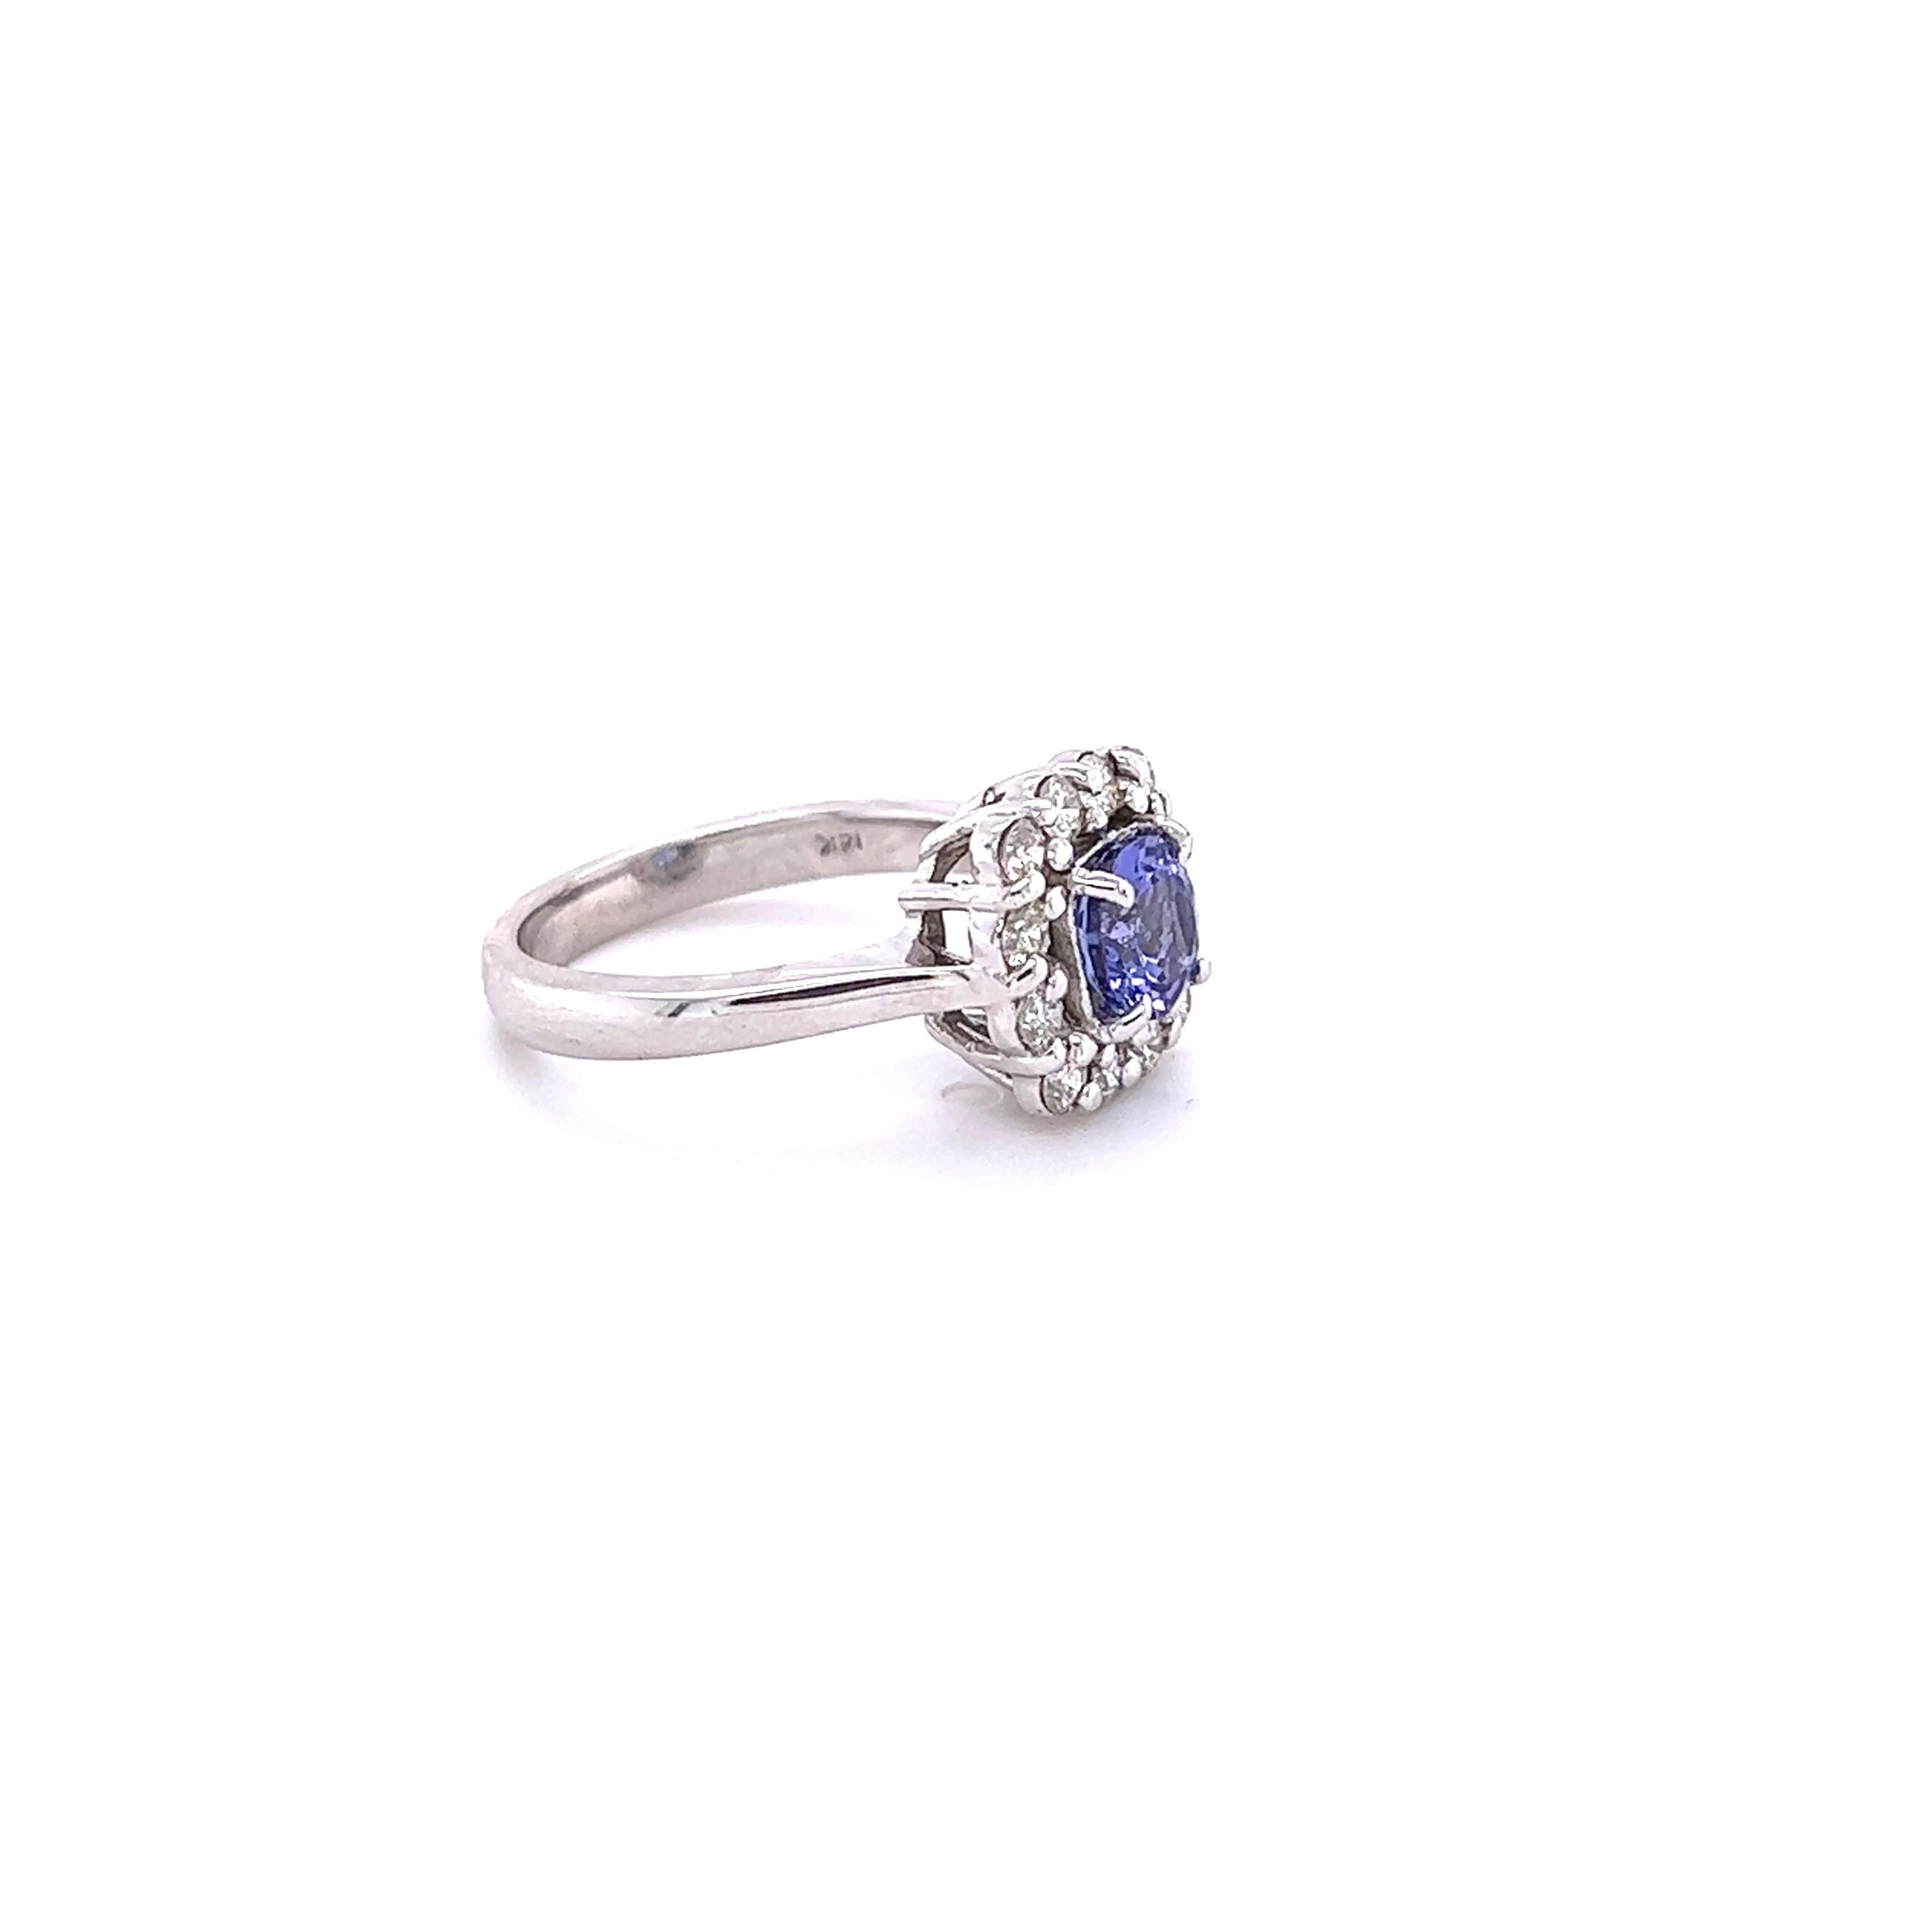 
This ring has a Round Cut Natural Blue Sapphire that weighs 1.01 Carats. It measures at 6 mm and has a purplish blue hue to it.

It is embellished with 12 Round Cut Diamonds that weigh 0.47 Carats. The clarity and color of the diamonds are VS-H.